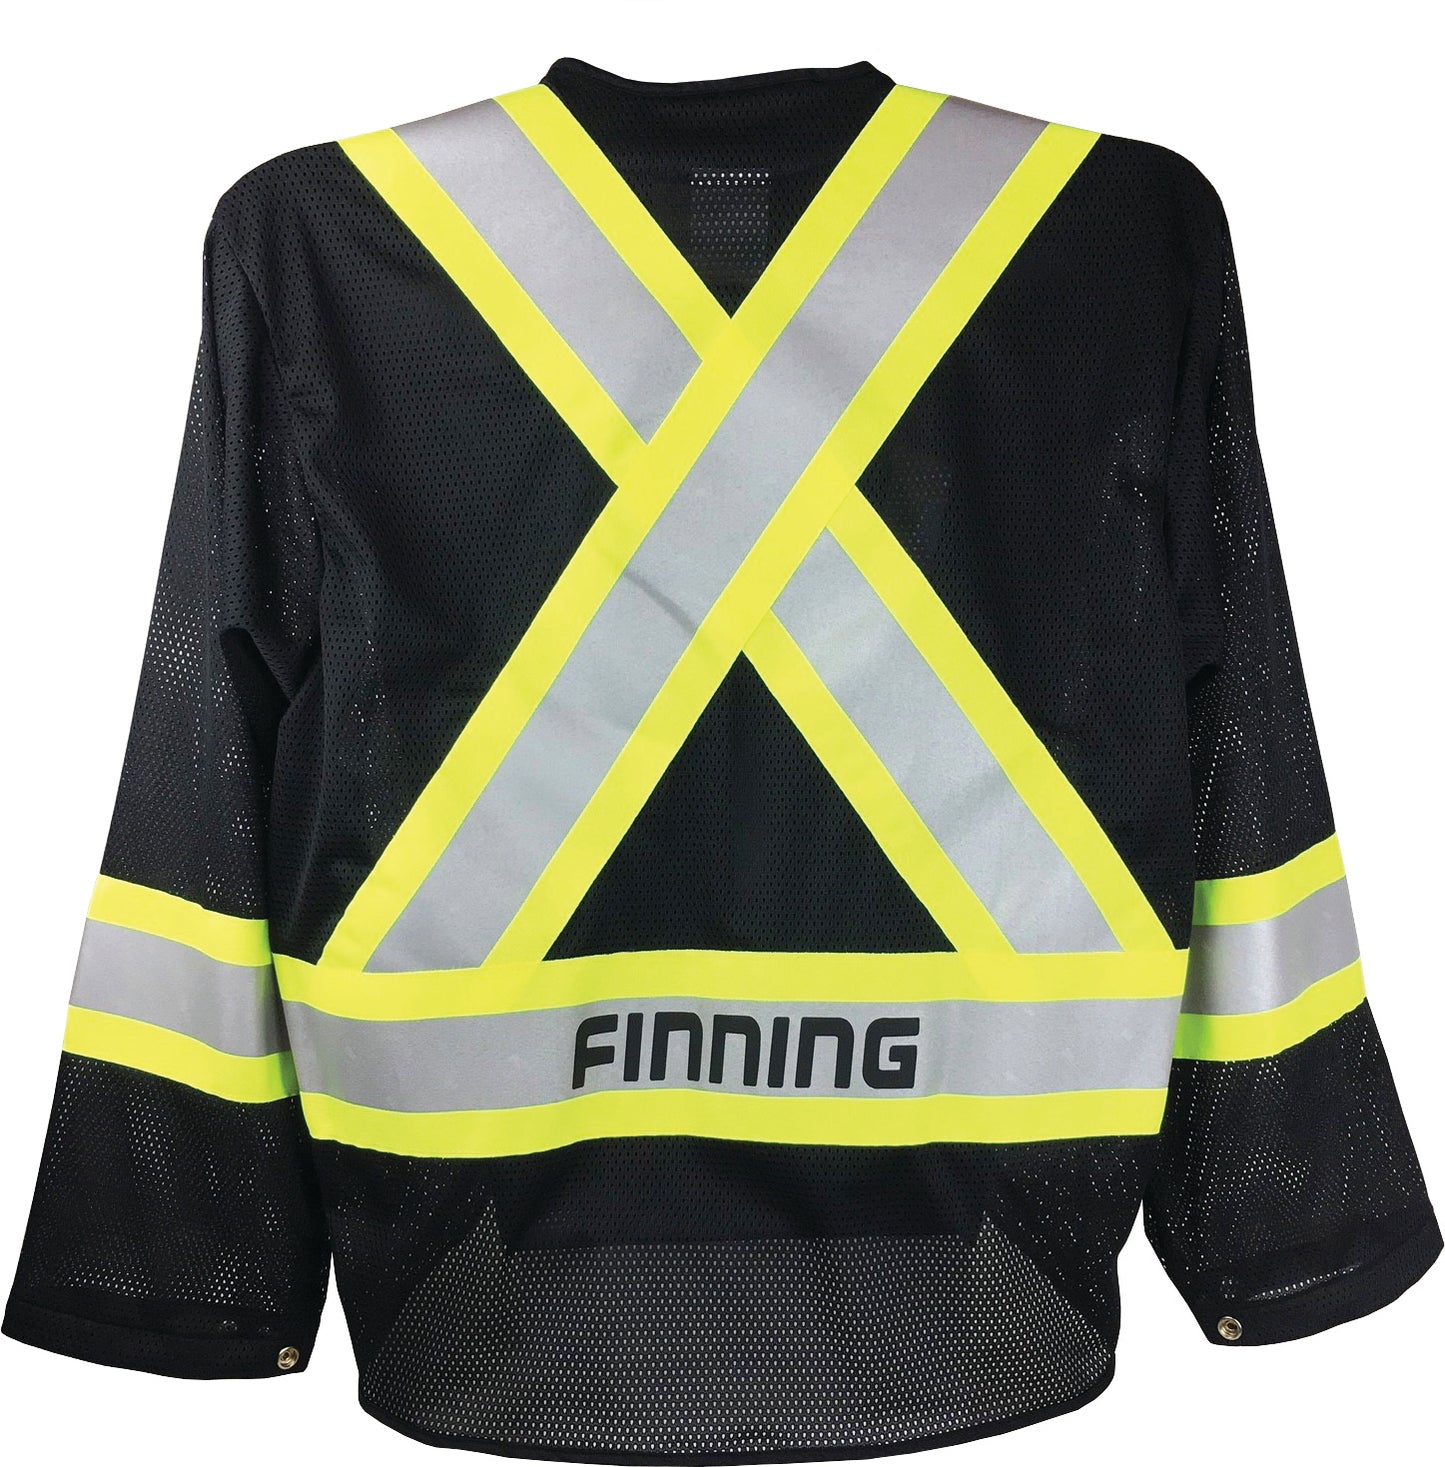 OVER2036 Black Mesh Jacket with front pockets & zipper front closure - CSA Class 1 Level 2